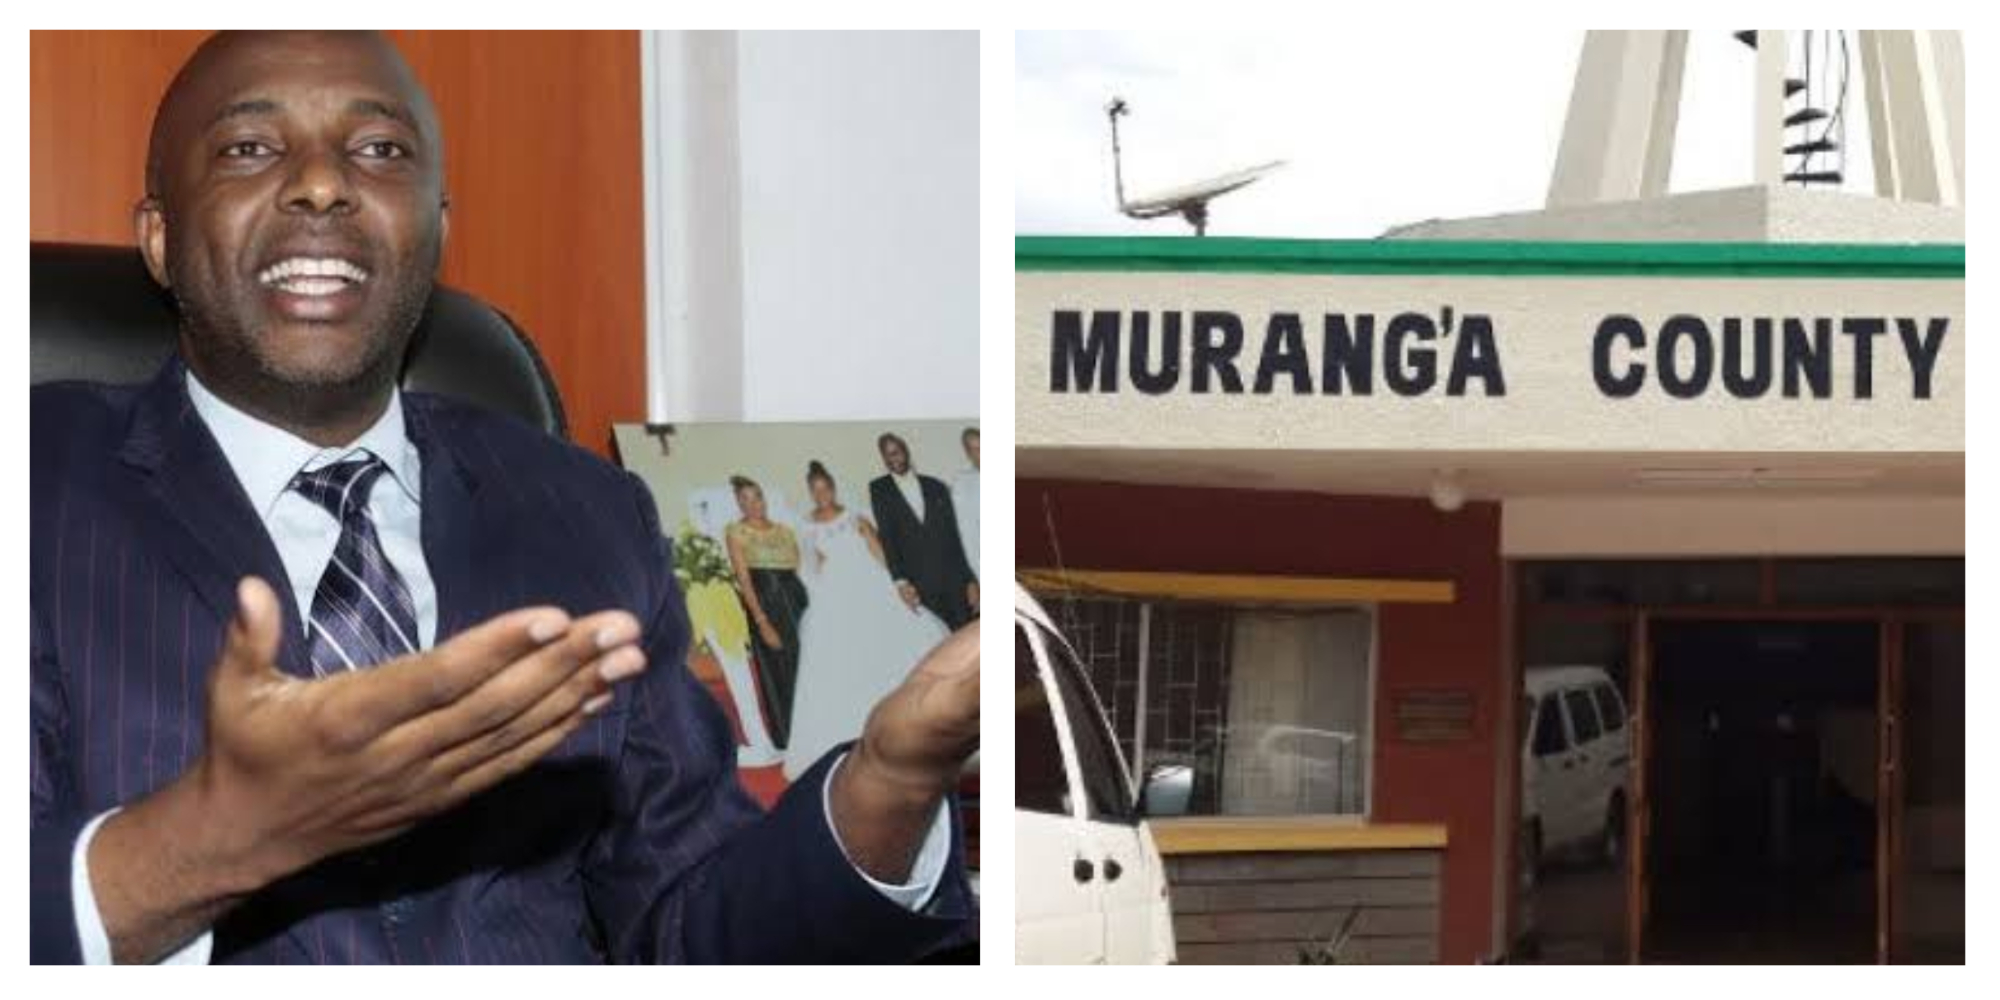 Murang’a Residents Furious after county government digital tax payment inconvenience them